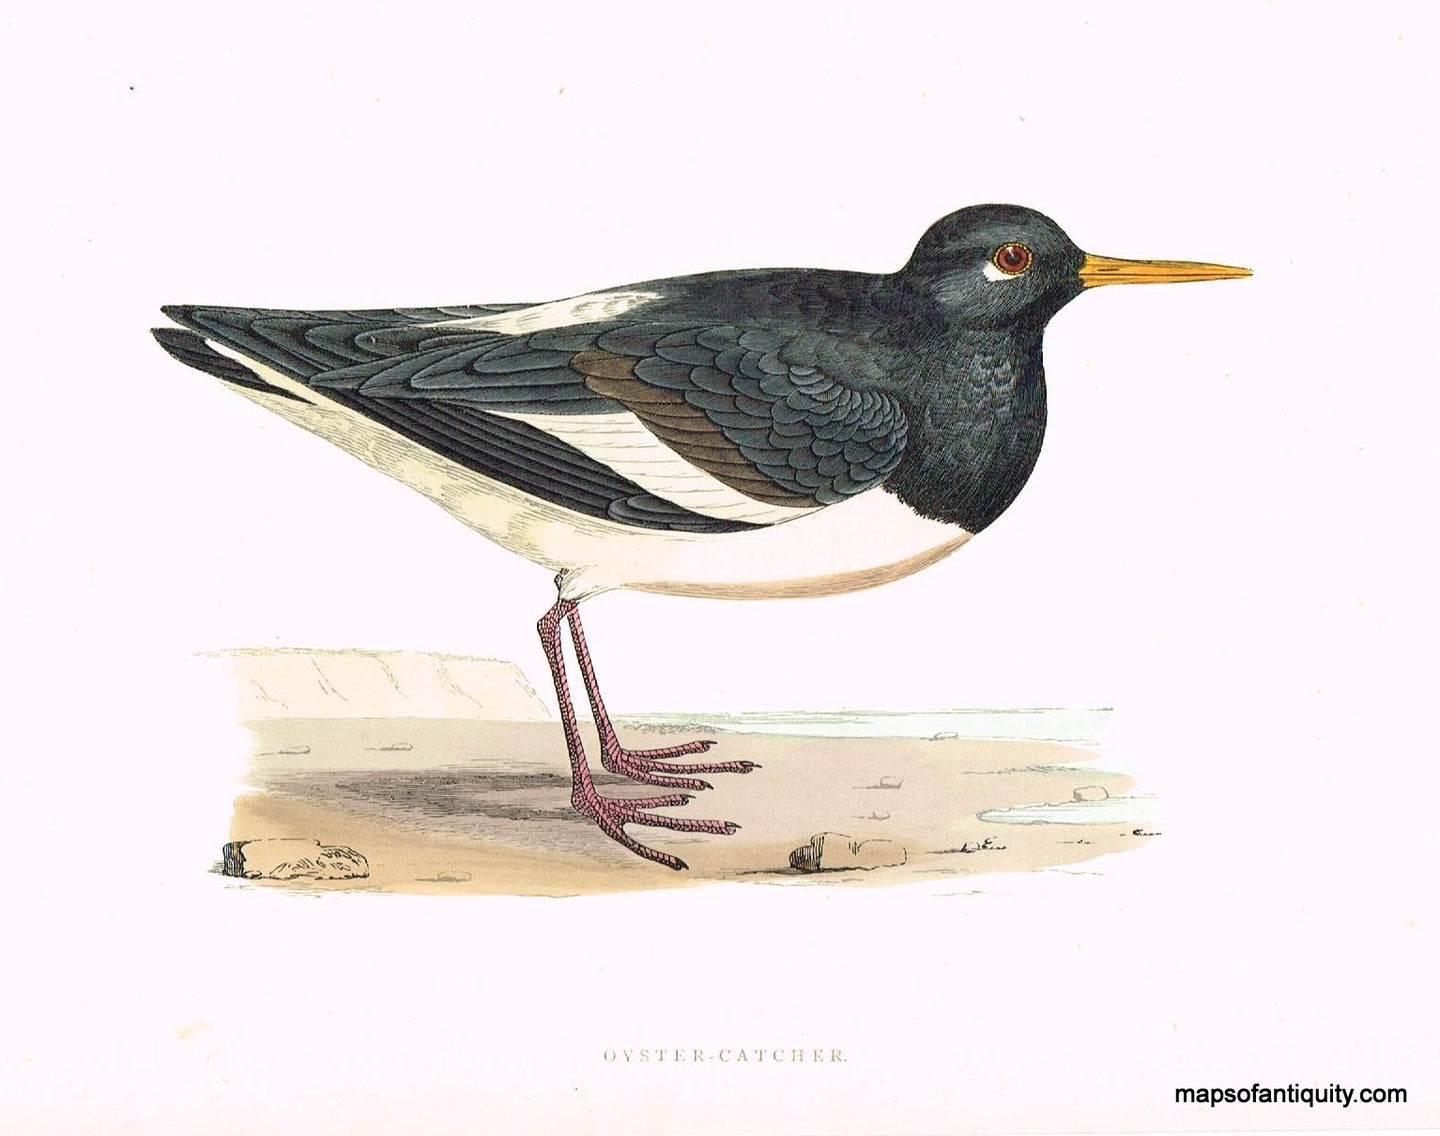 Antique-Hand-Colored-Engraved-Illustration-Oyster-Catcher-Morris-bird-Natural-History-Birds-1851-Morris-Maps-Of-Antiquity